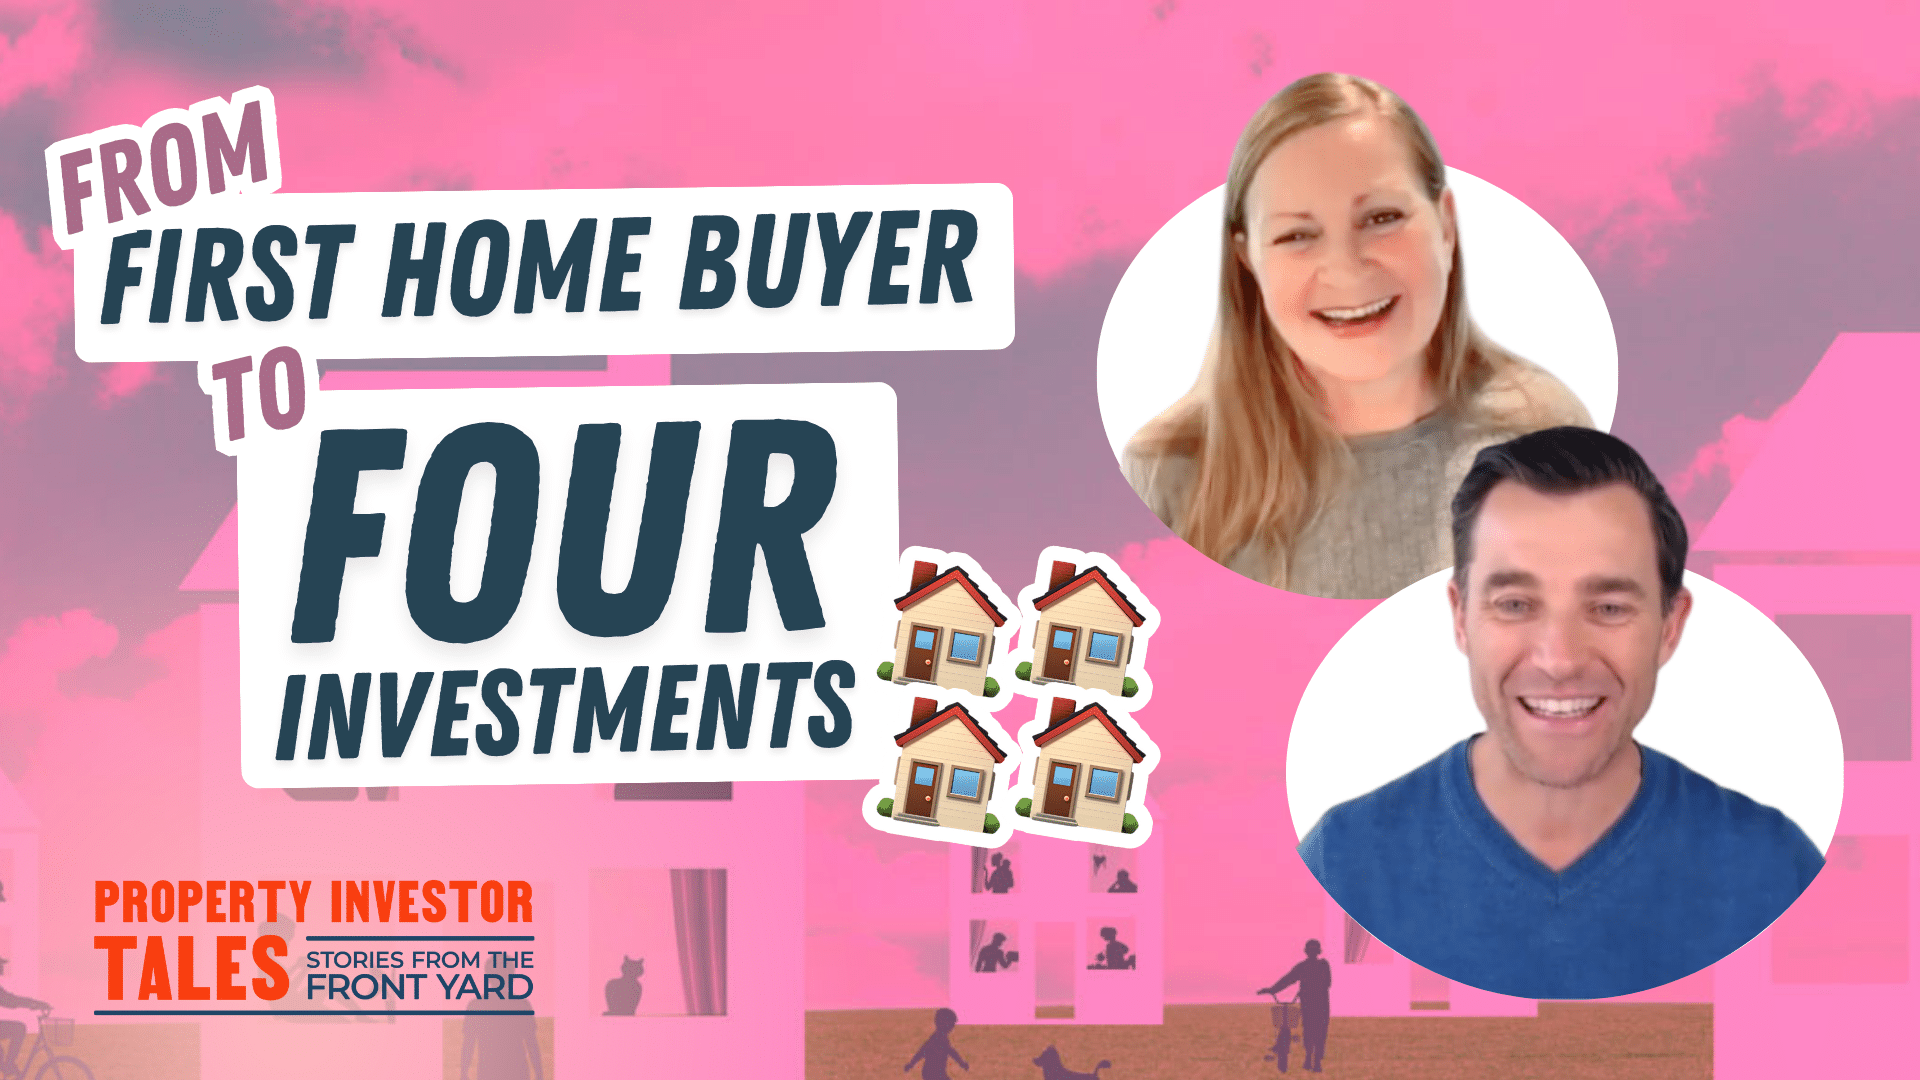 From First Home Buyer to Four Investments